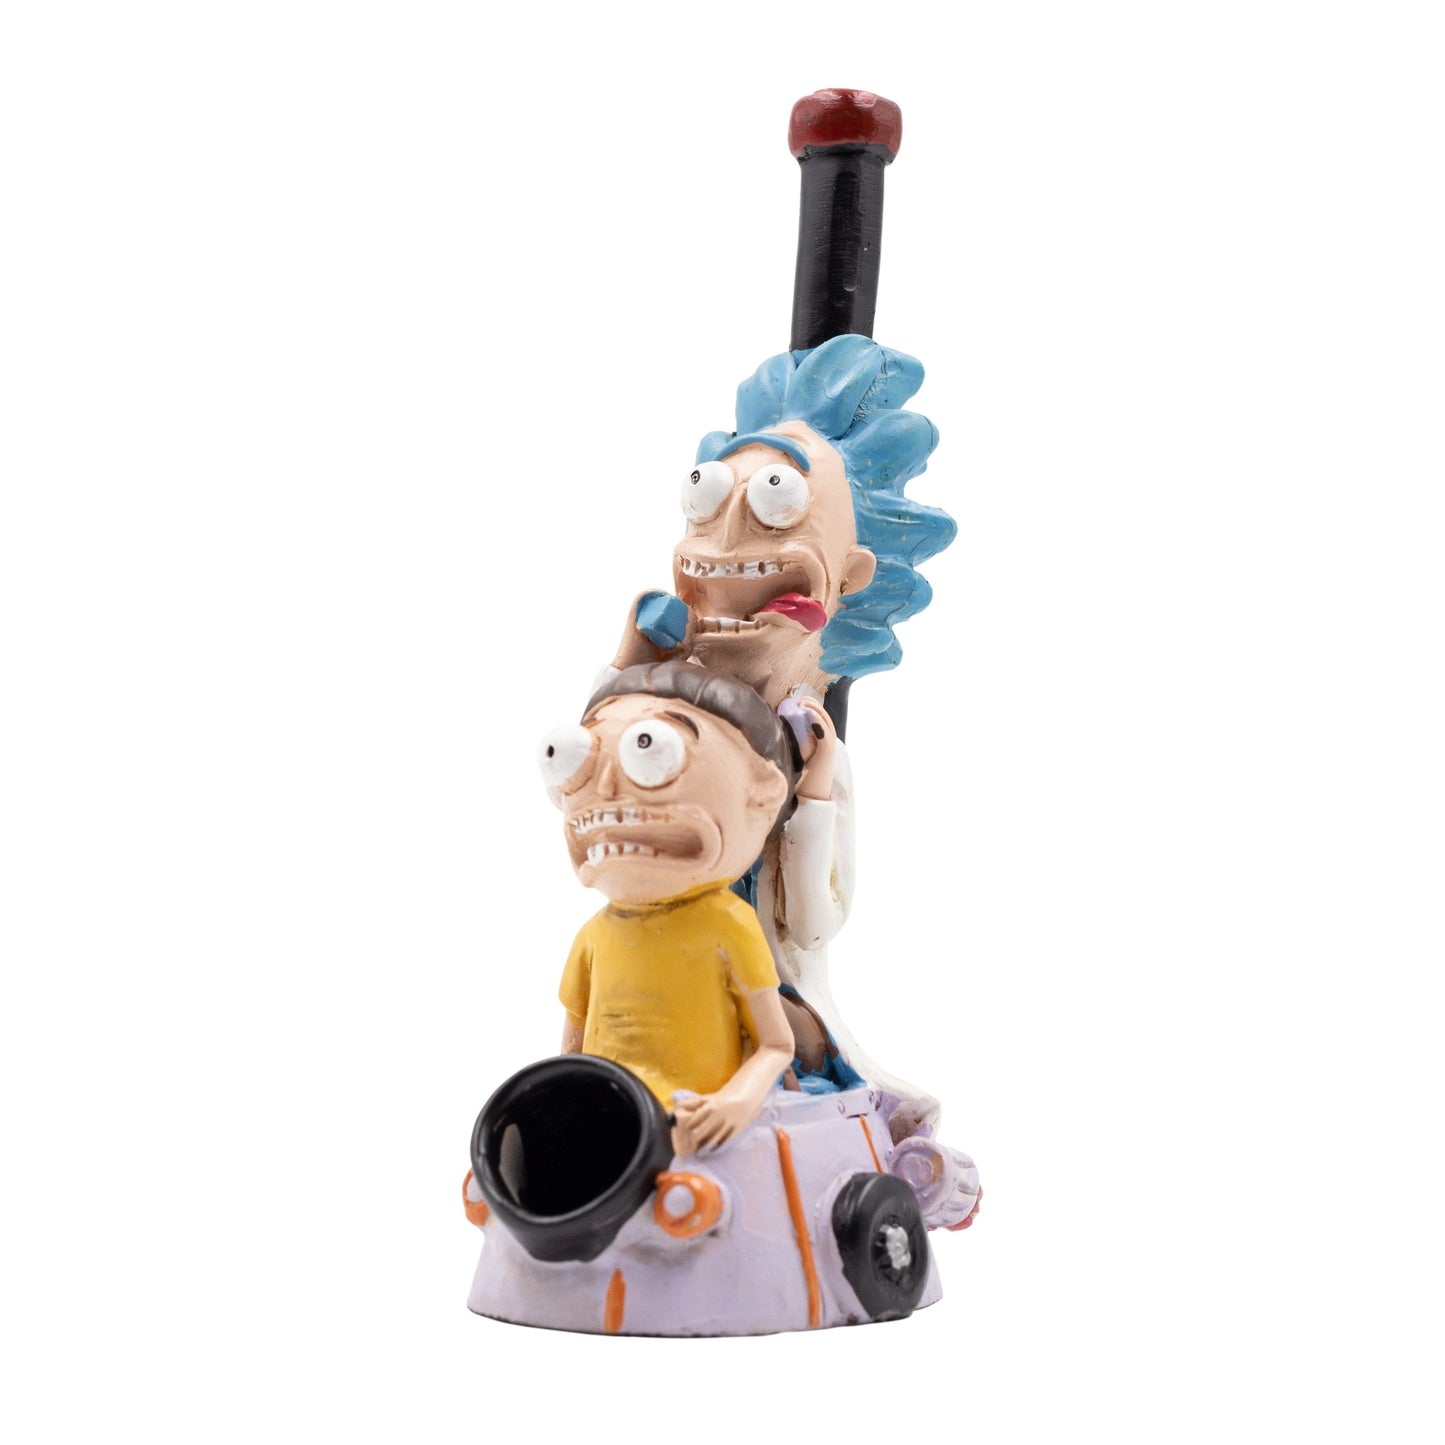 Cool hand-painted clay pipe smoking device figurine-like in Rick and morty Space Ship design